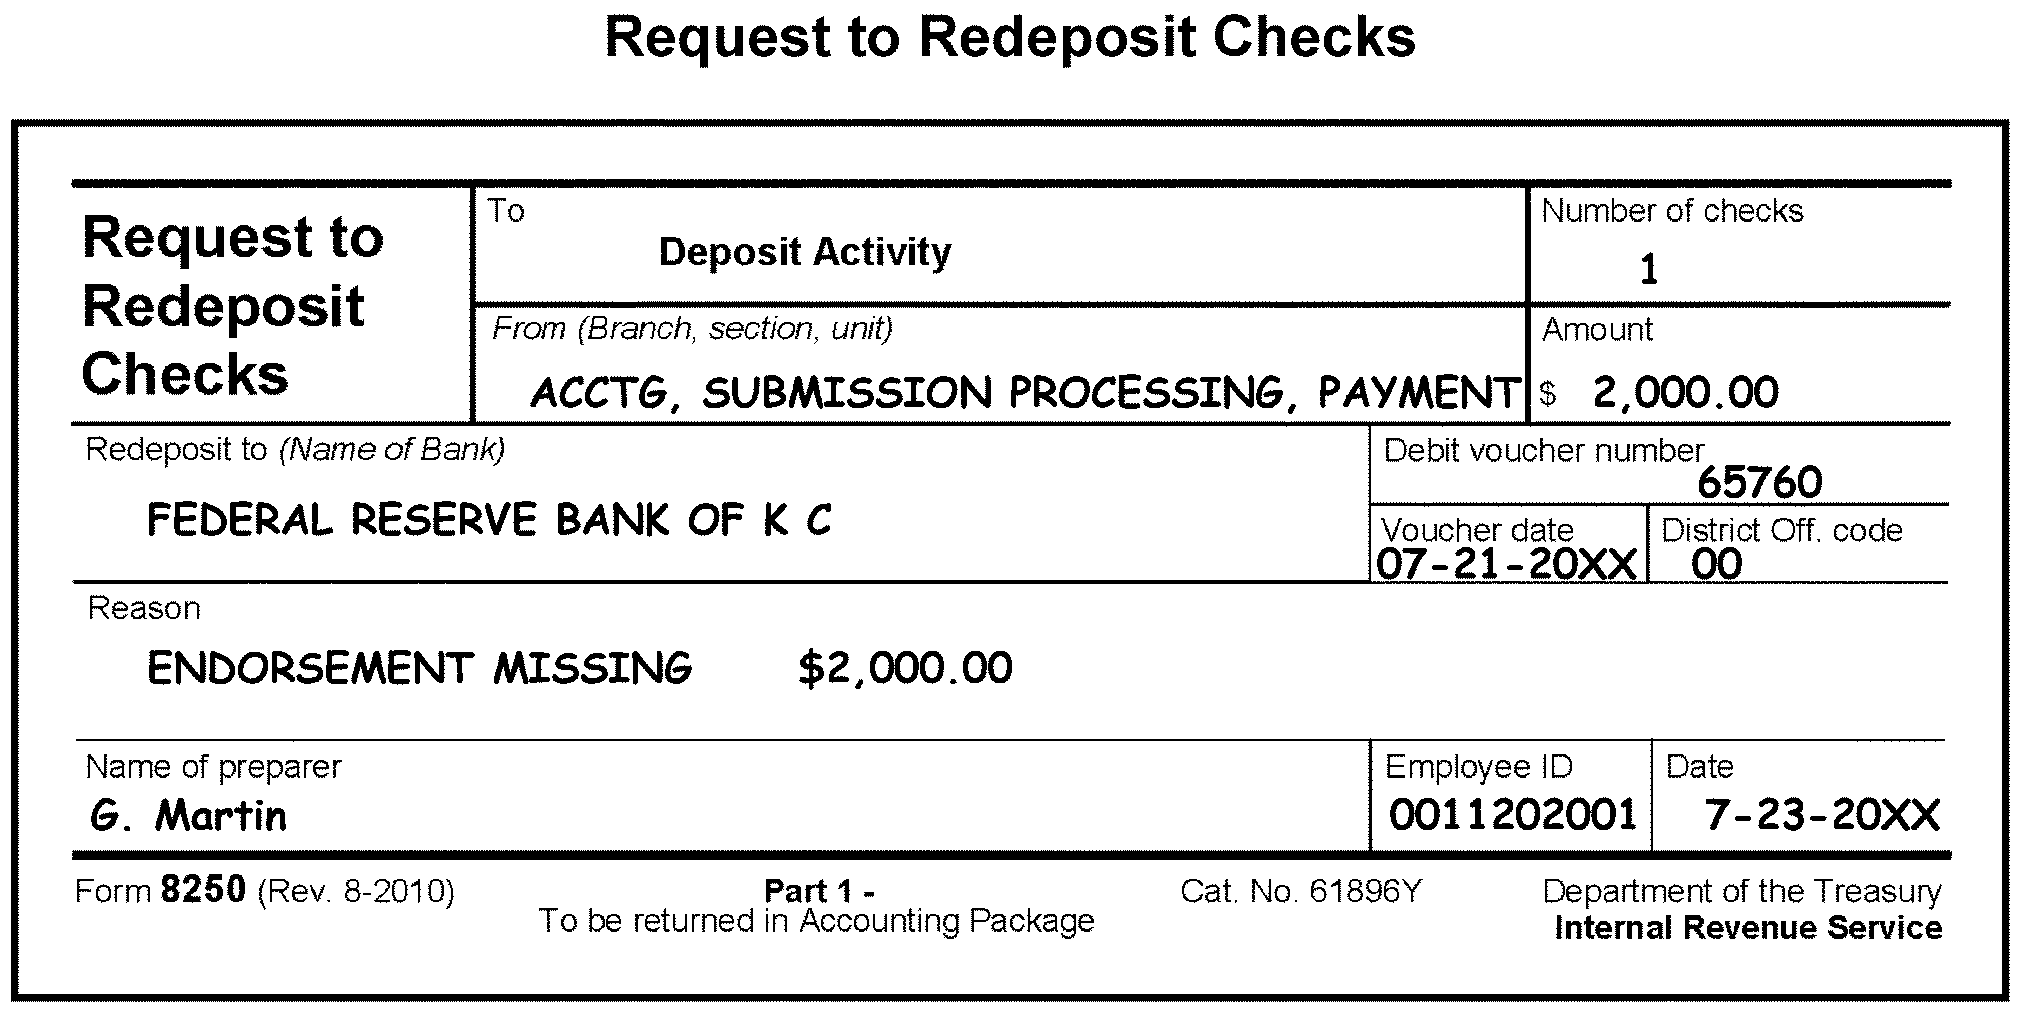 9.9.9 Dishonored Check File (DCF) and Unidentified Remittance